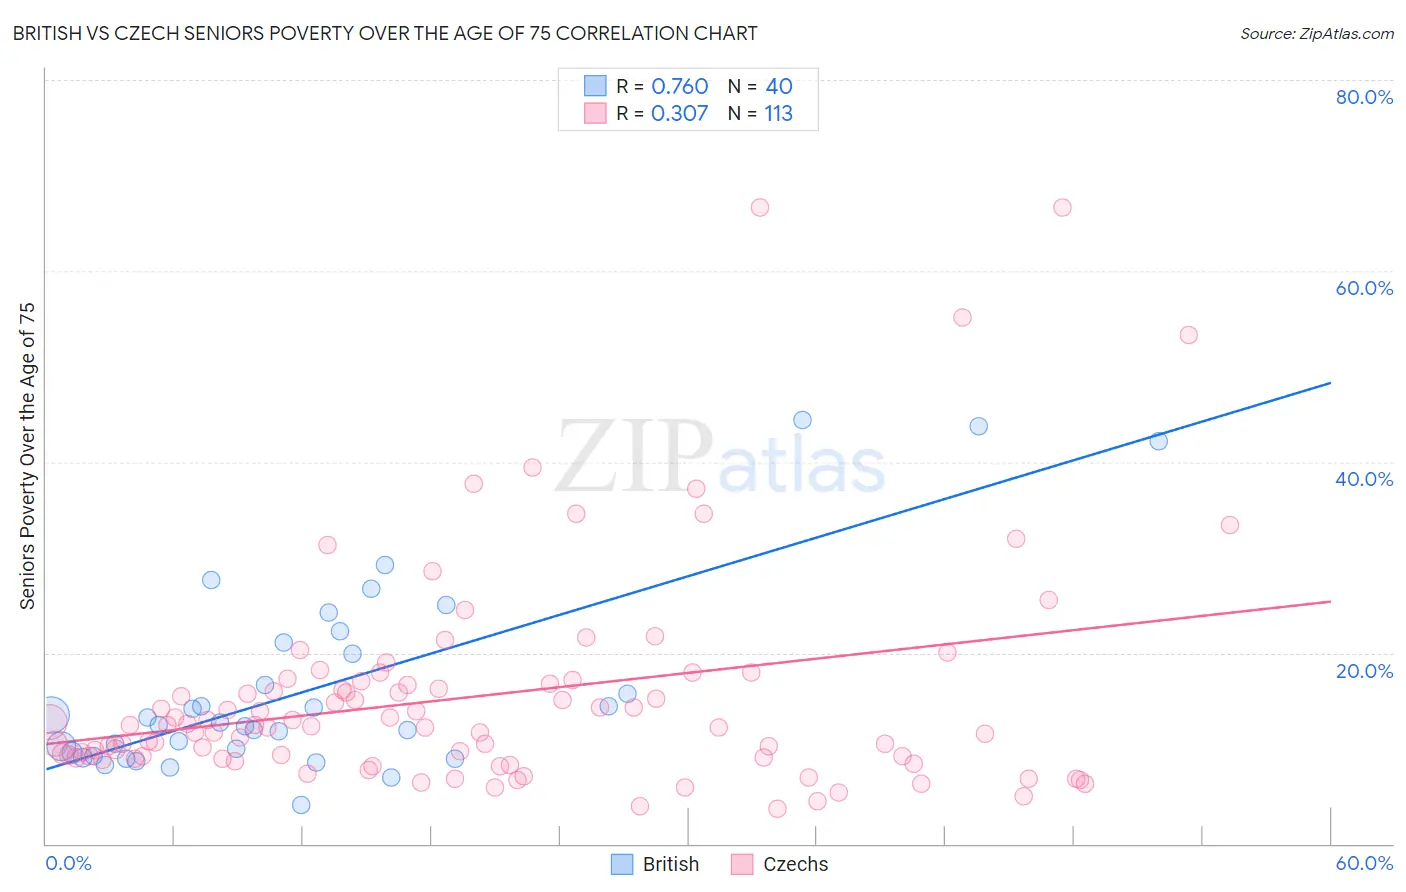 British vs Czech Seniors Poverty Over the Age of 75